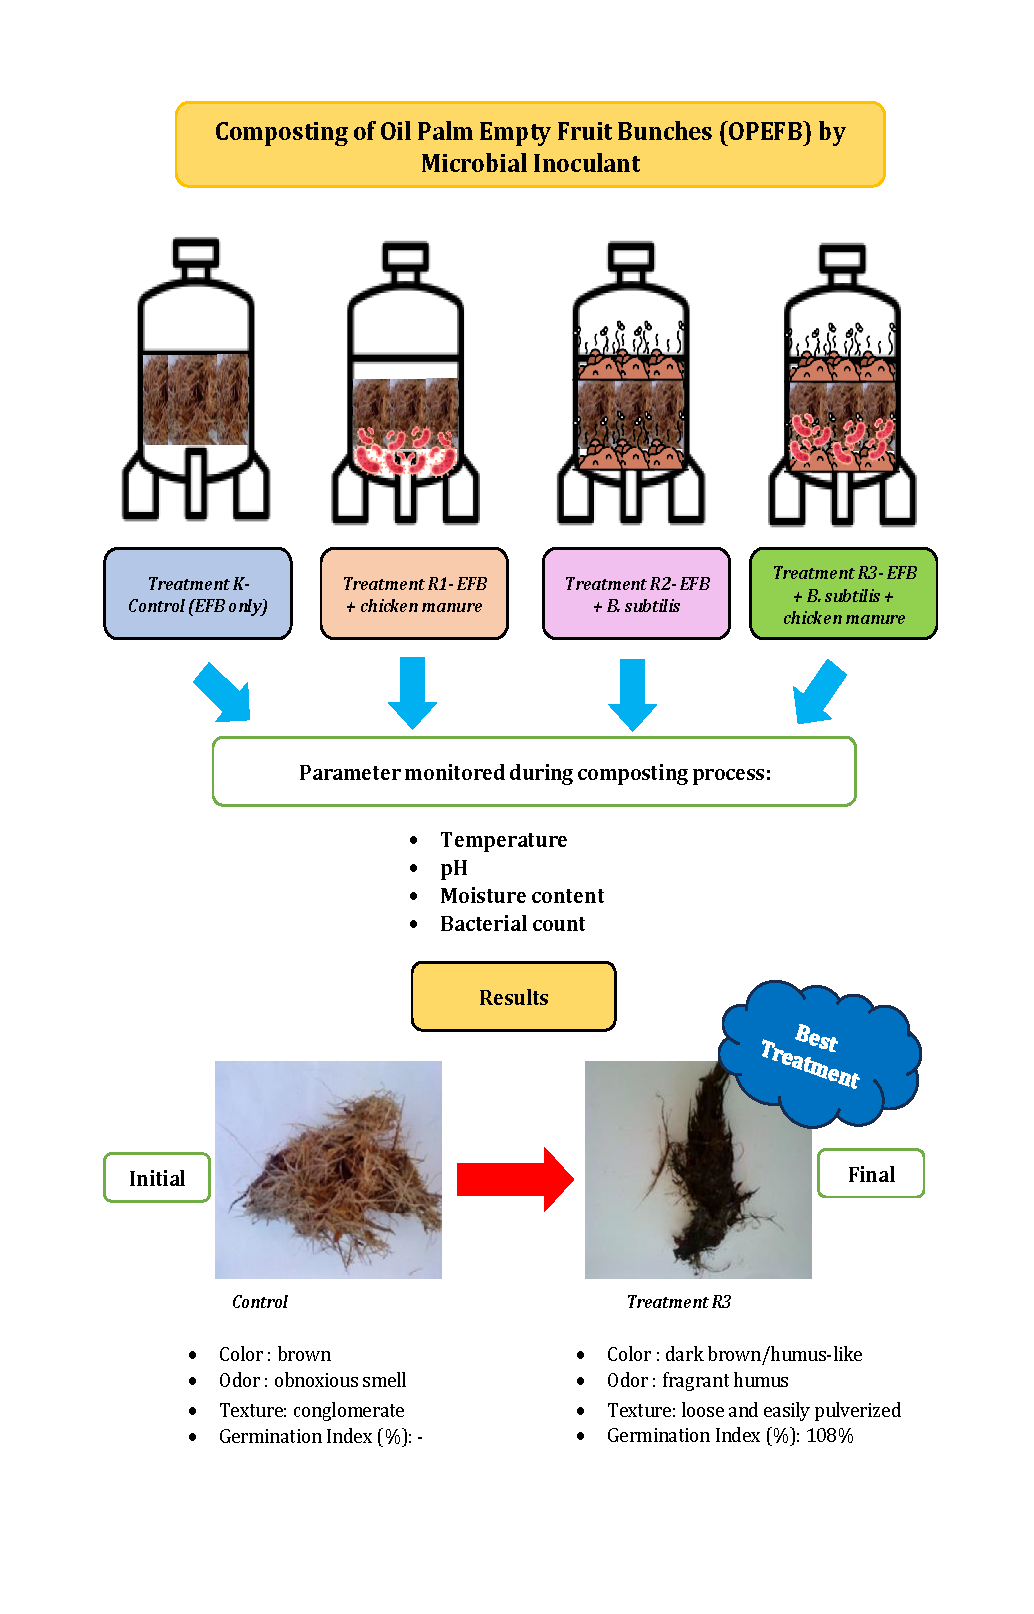 Composting of Oil Palm Empty Fruit Bunches by Microbial Inoculant